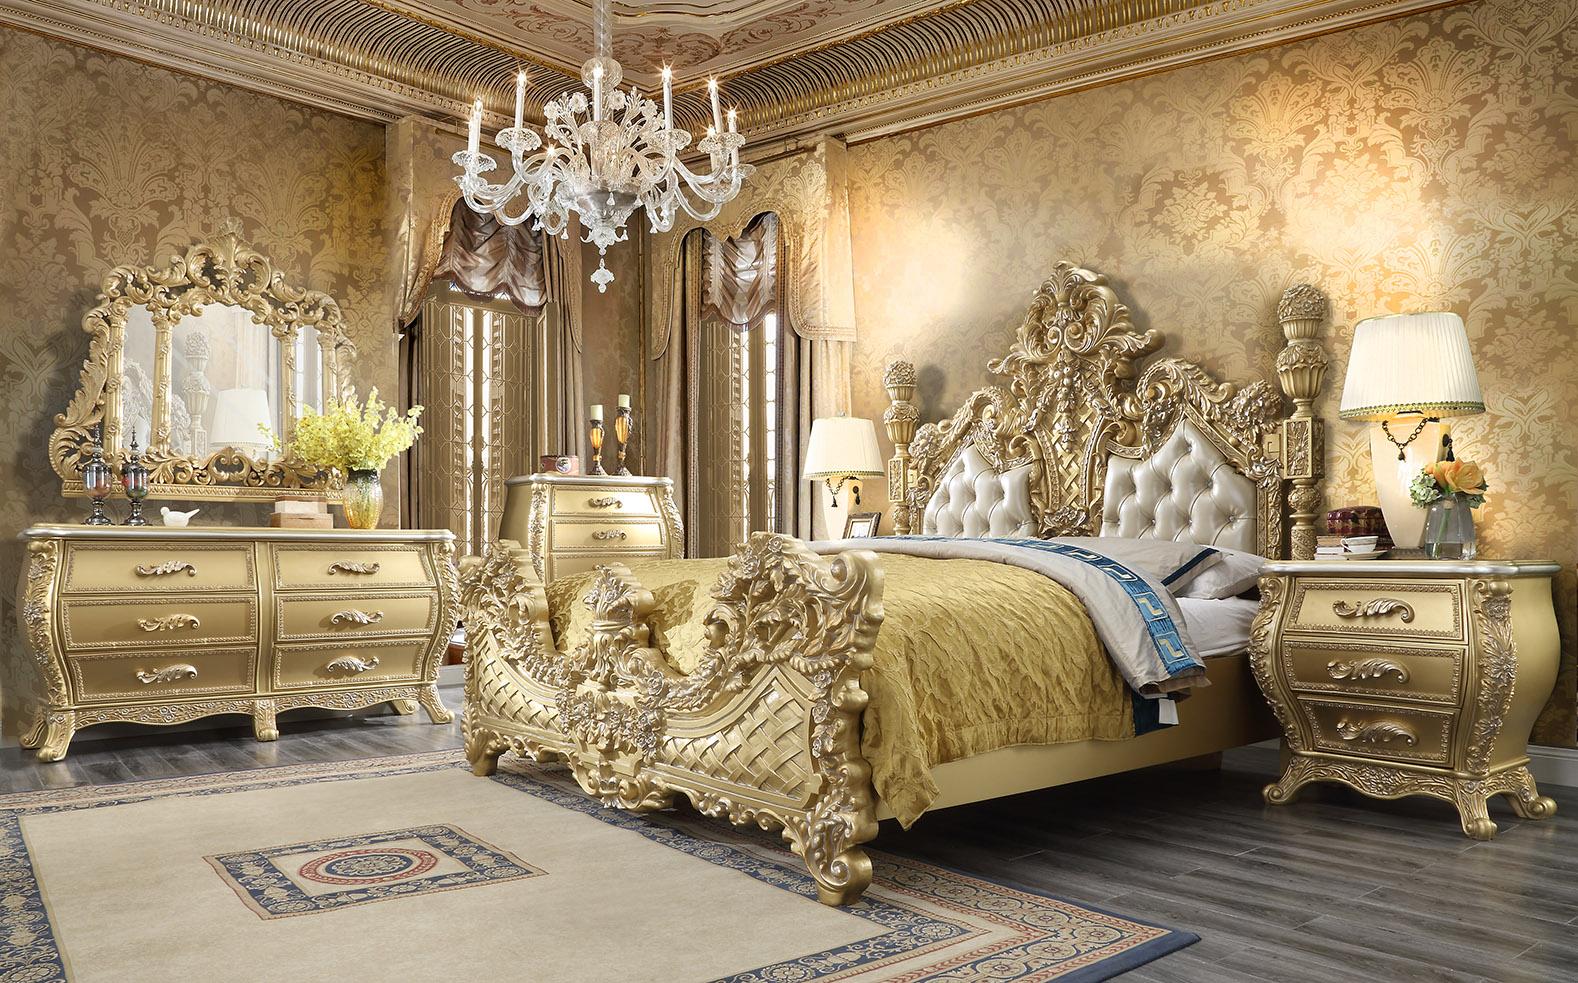 

    
HD-CK1801-2PC Antique Gold & Leather Cal King Bedroom Set 2Pcs Traditional Homey Design HD-1801
